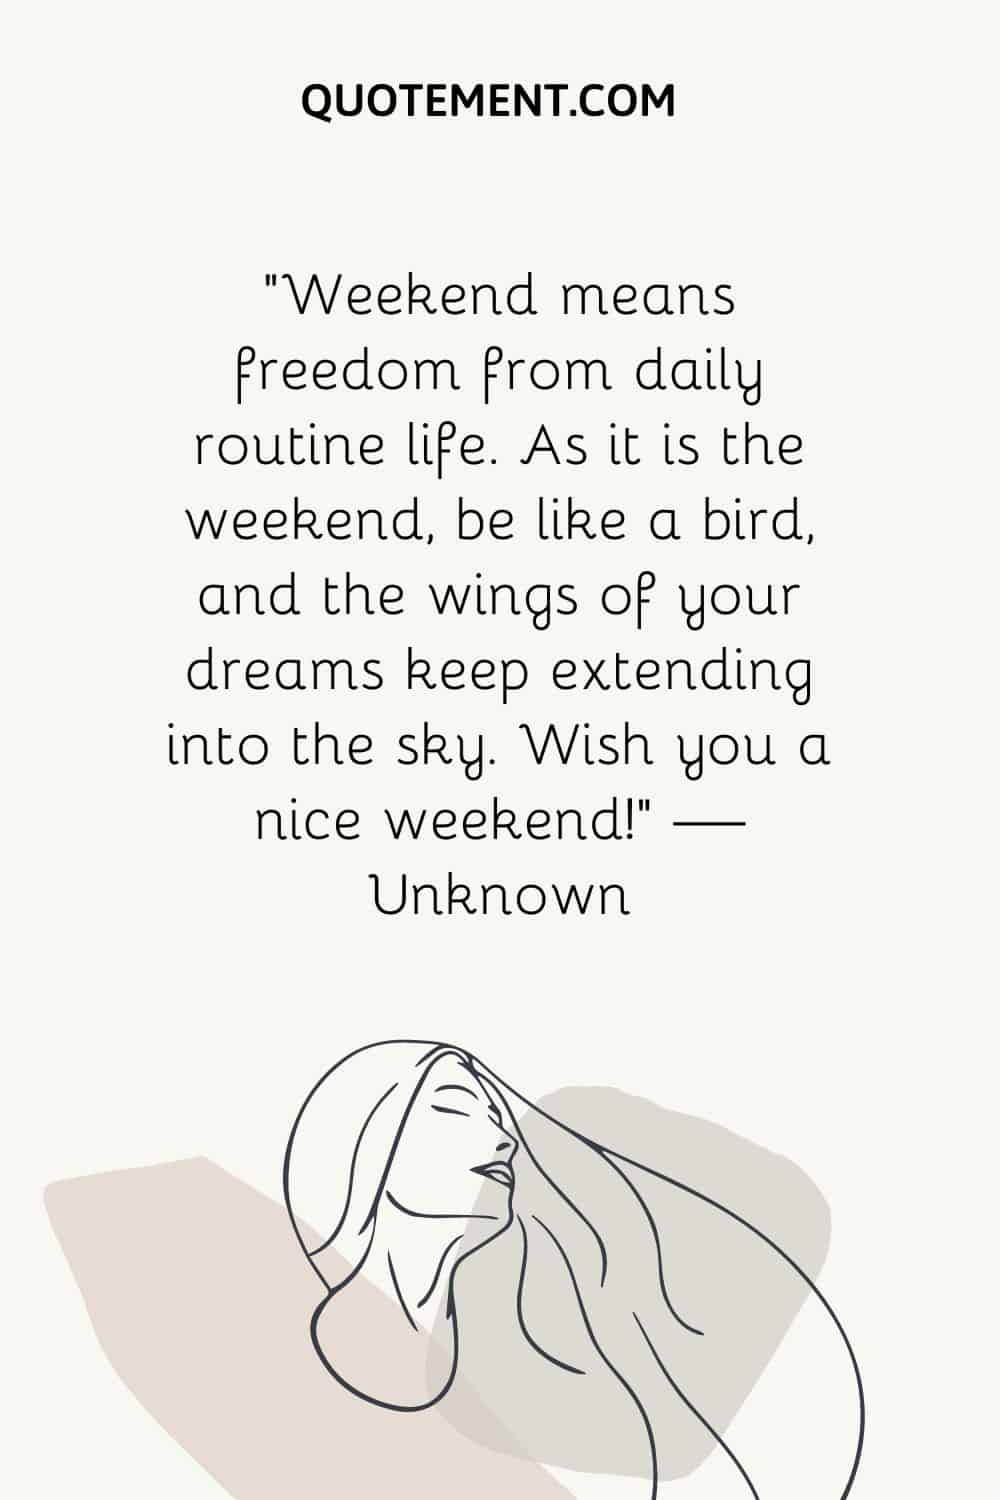 “Weekend means freedom from daily routine life. As it is the weekend, be like a bird, and the wings of your dreams keep extending into the sky. Wish you a nice weekend!” — Unknown